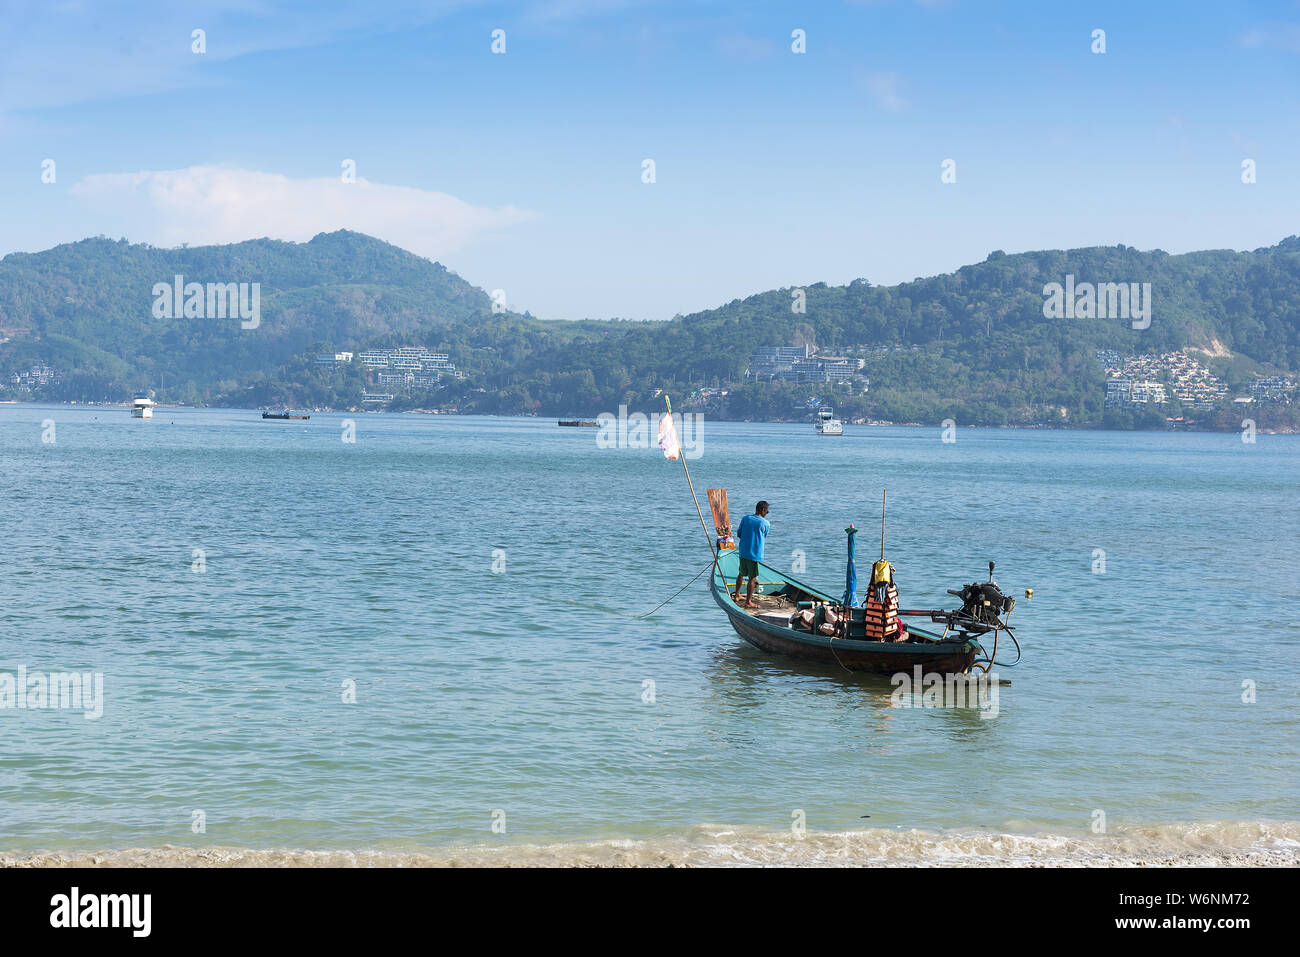 Phuket, Thailand, Patong Beach, 04/19/2019: looking over the sea towards a mainland with fishing boat in foreground. Stock Photo